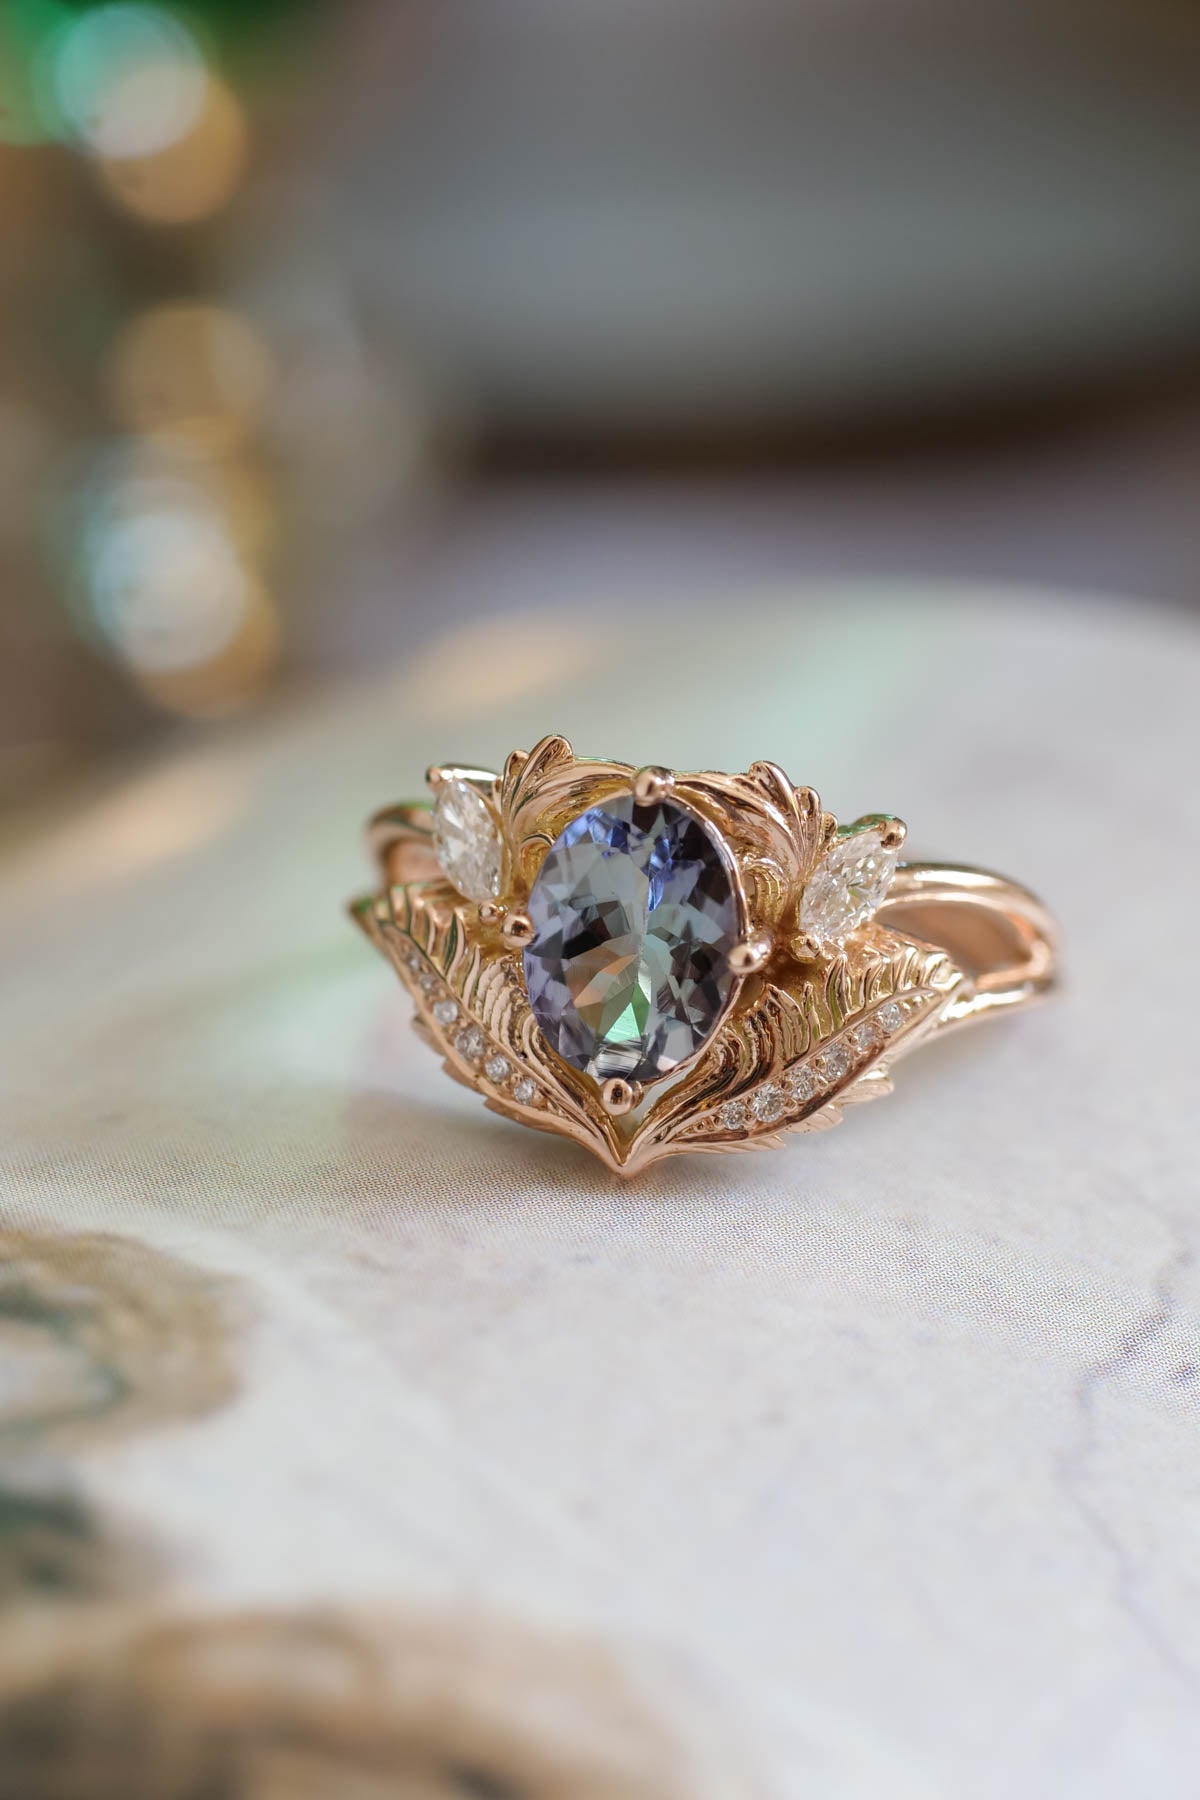 READY TO SHIP: Adonis in 14K rose gold, natural oval bi-color tanzanite 8x6 mm, diamonds, RING SIZE 8.25 US - Eden Garden Jewelry™